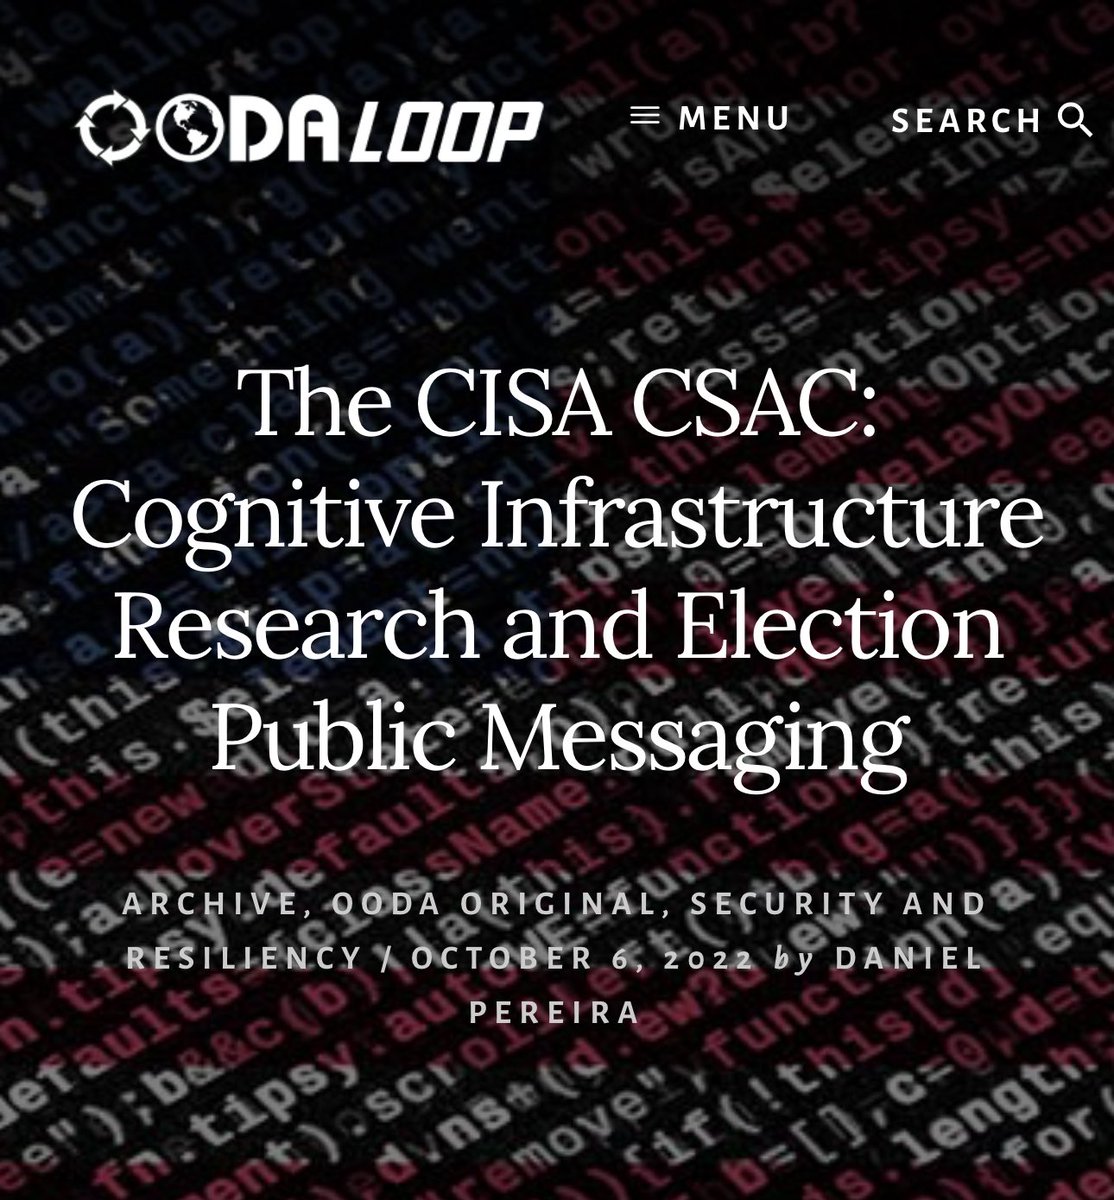 @Rothmus Meanwhile CISA has been busy classifying speech as Cognitive Infrastructure, thus putting censorship under the National Security banner. oodaloop.com/archive/2022/1…